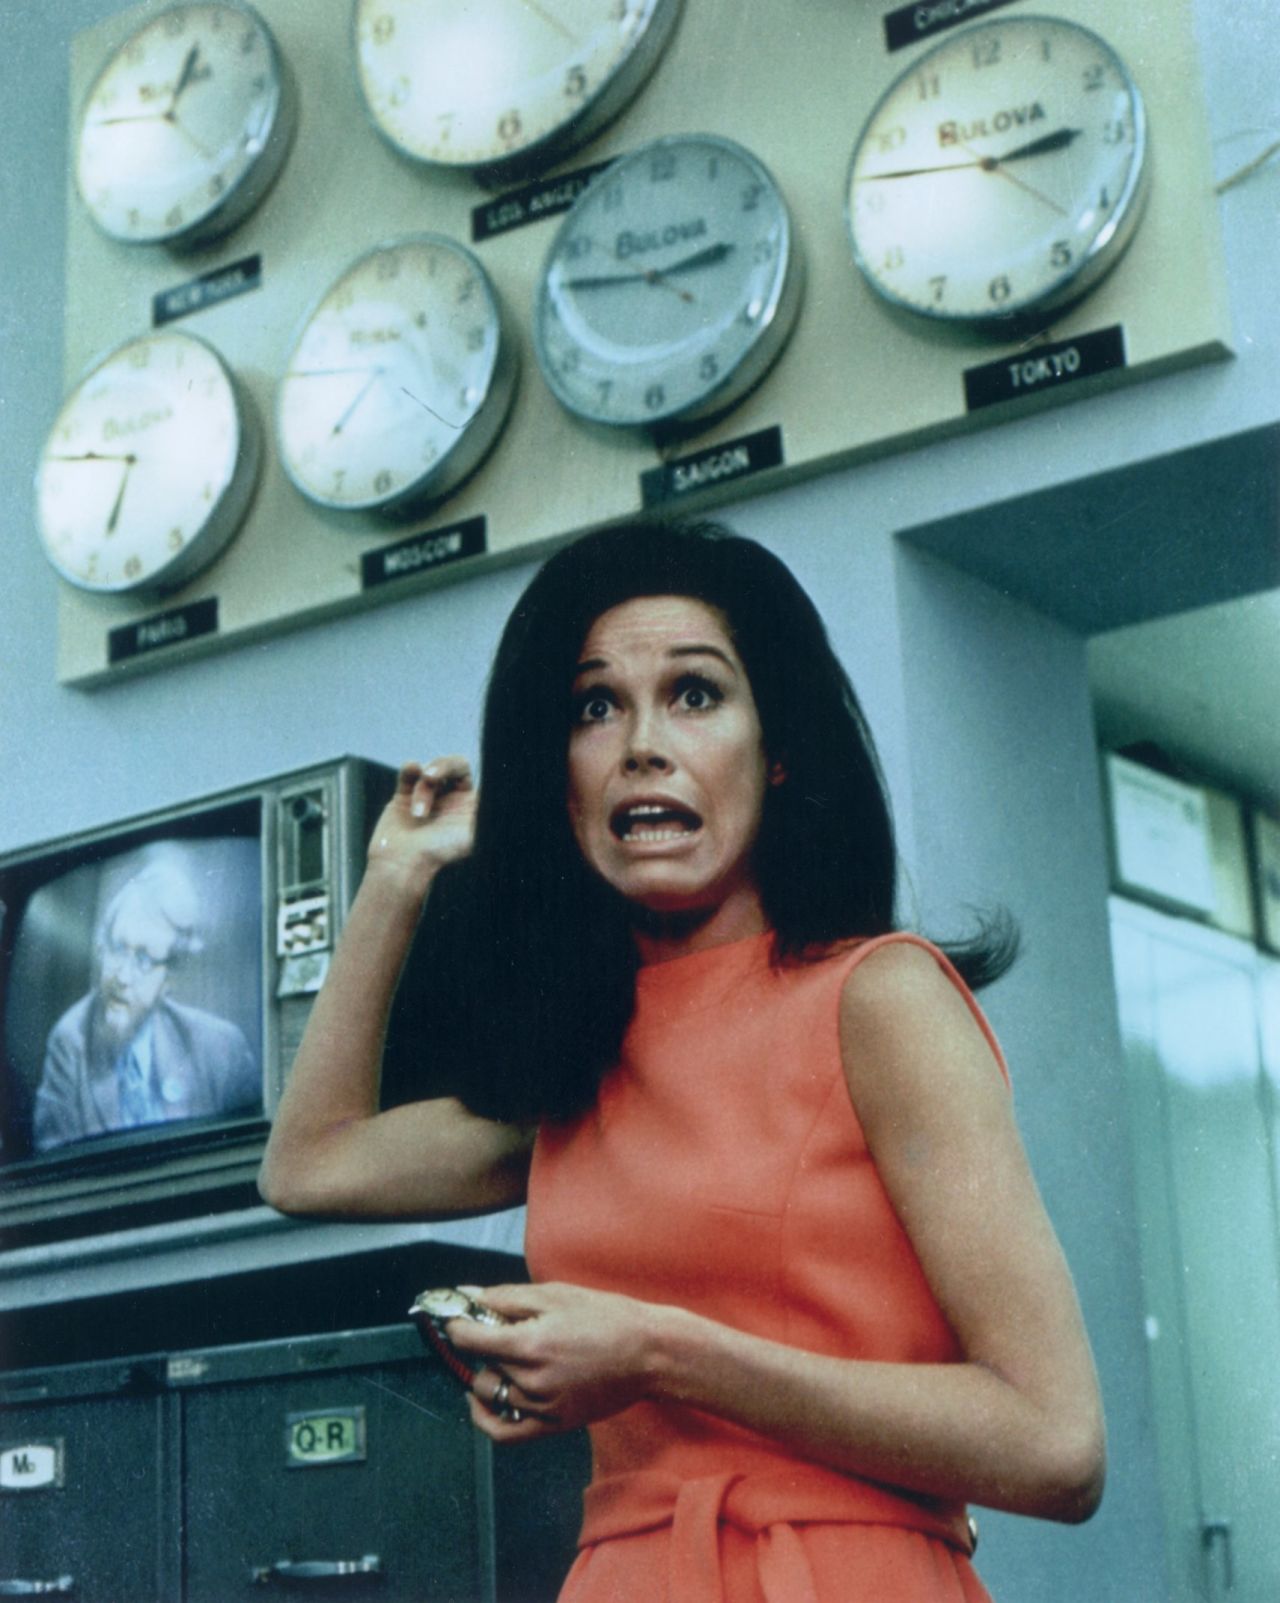 Mary Tyler Moore did more than make us laugh throughout her career; she broke ground in the 1970s by portraying a single, 30-something working woman. That's all TV comedies were about in the '90s and 2000s, but at the dawn of the '70s, "The Mary Tyler Moore Show" was an entirely new breed. If the "Girls" of today are going to raise their drinks to anyone, it should be in celebration of Moore.